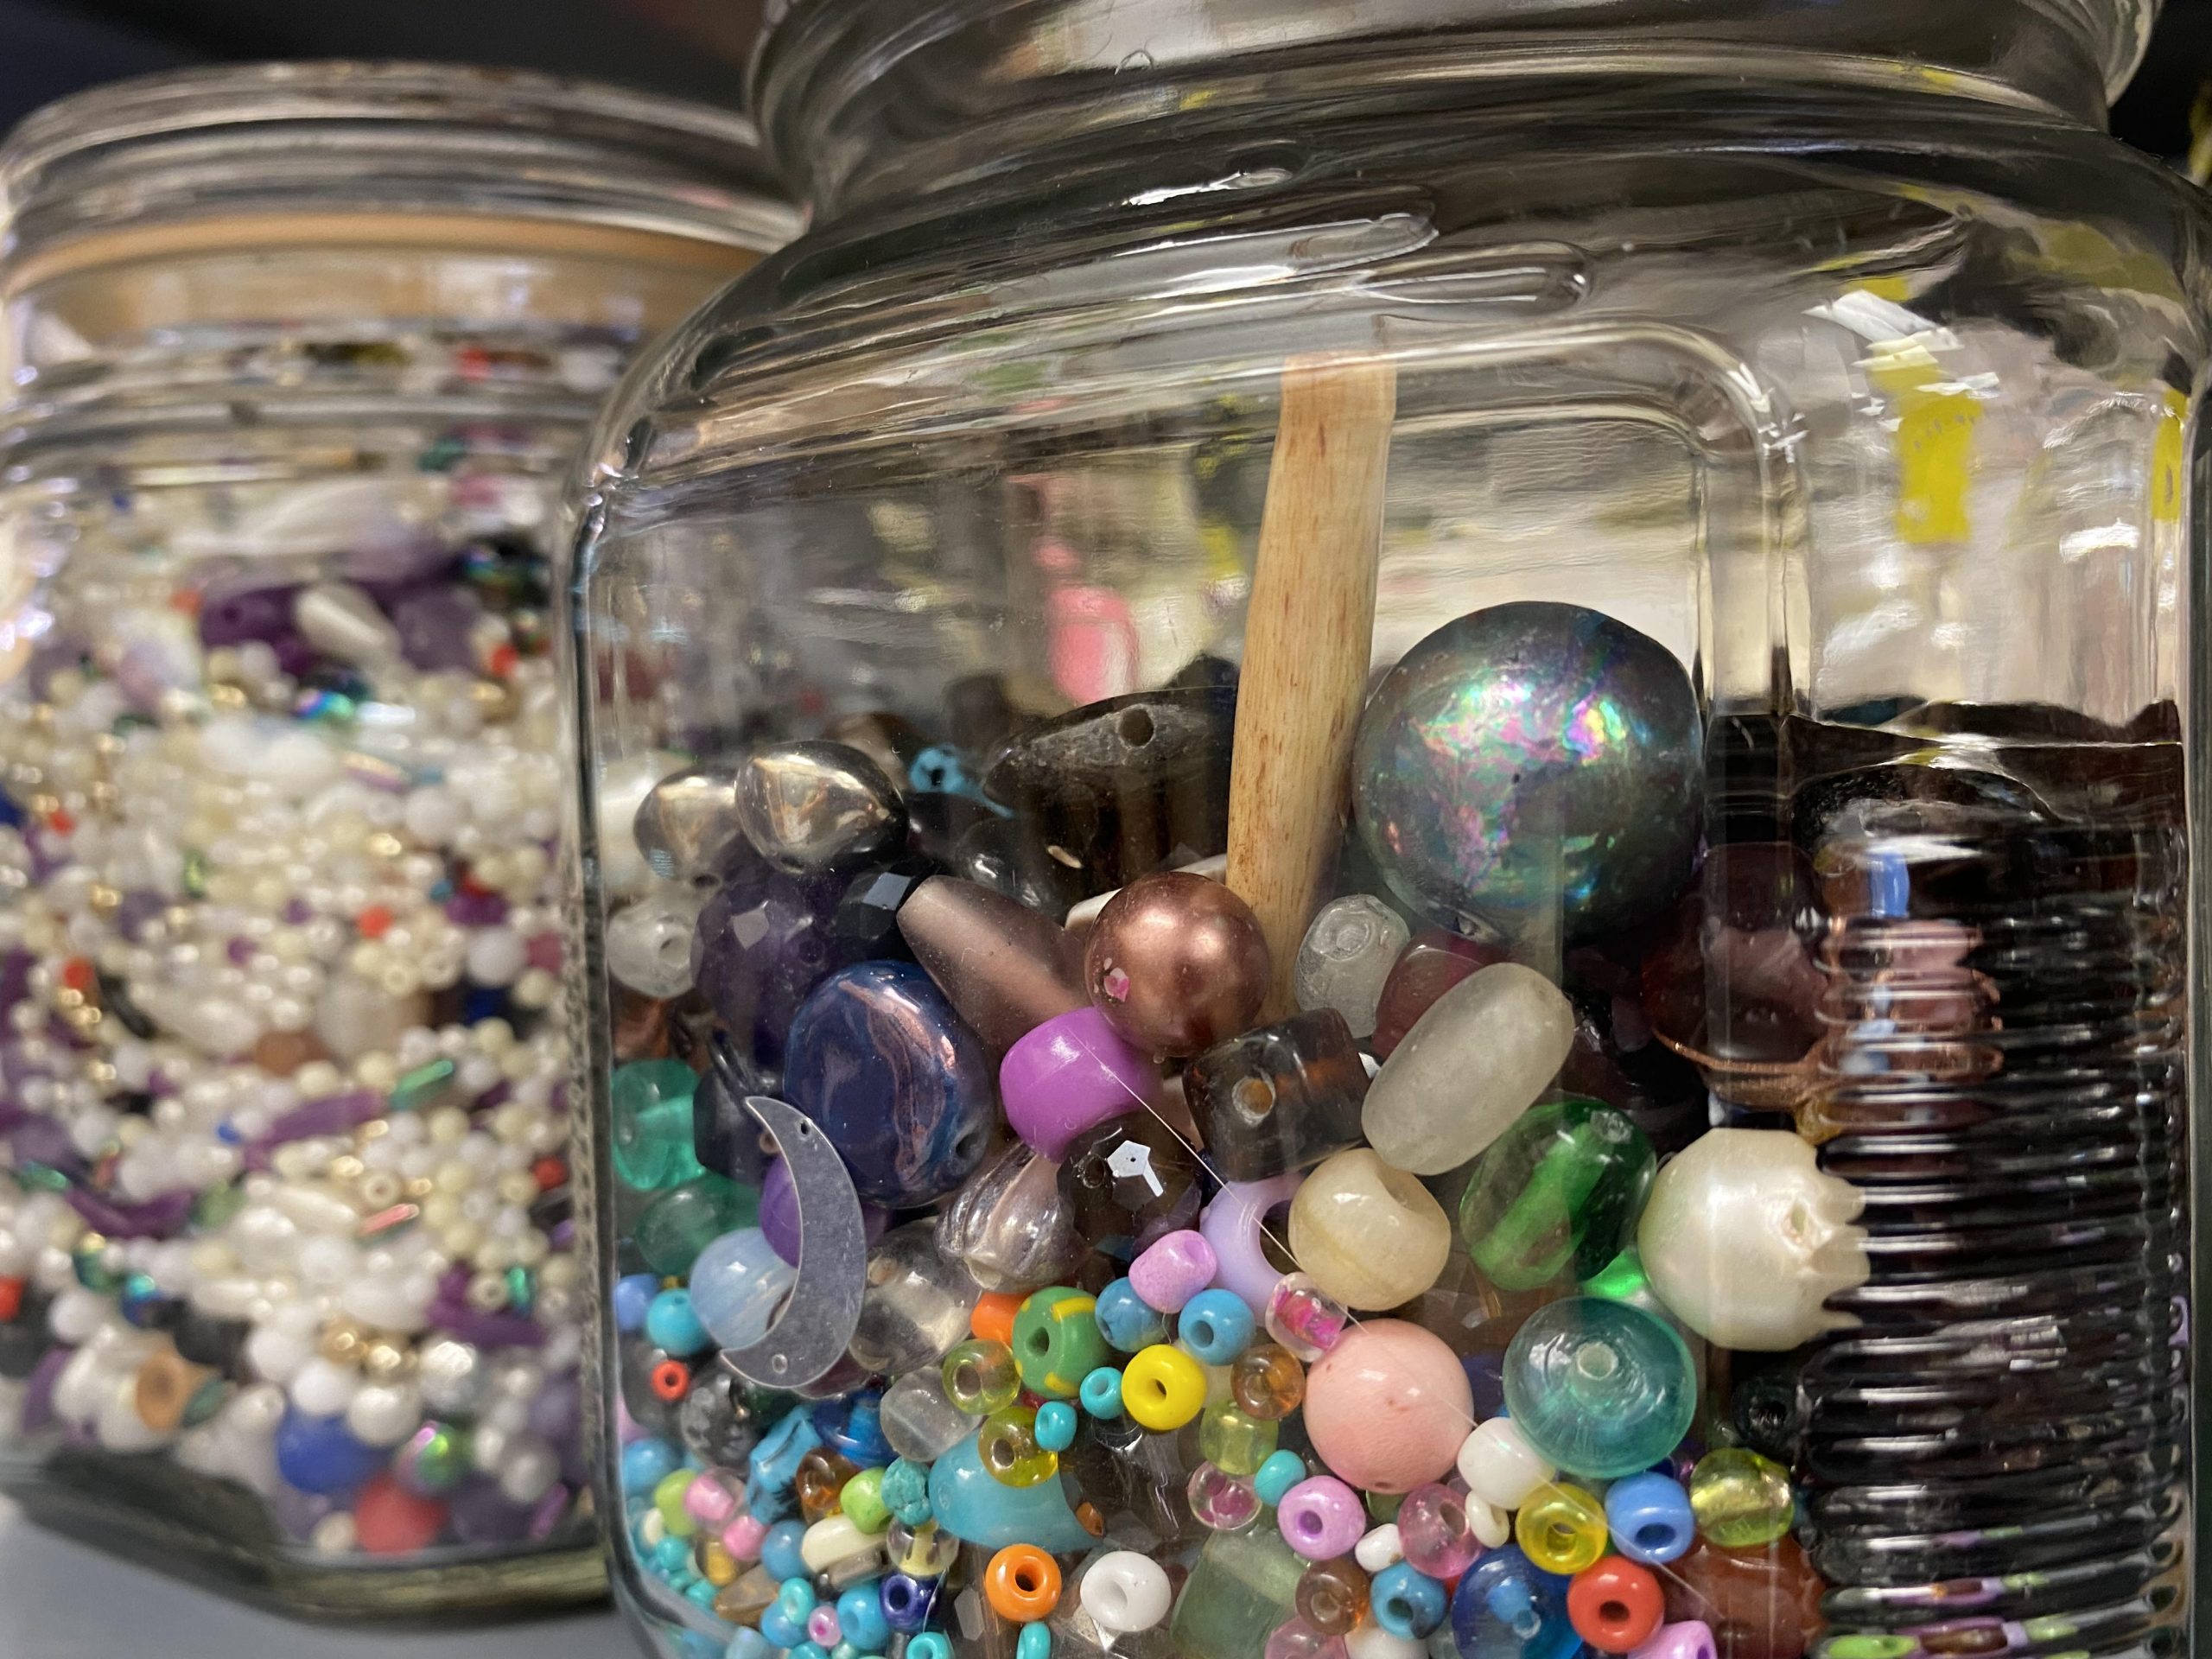 A close up of beads in a clear glass jar.